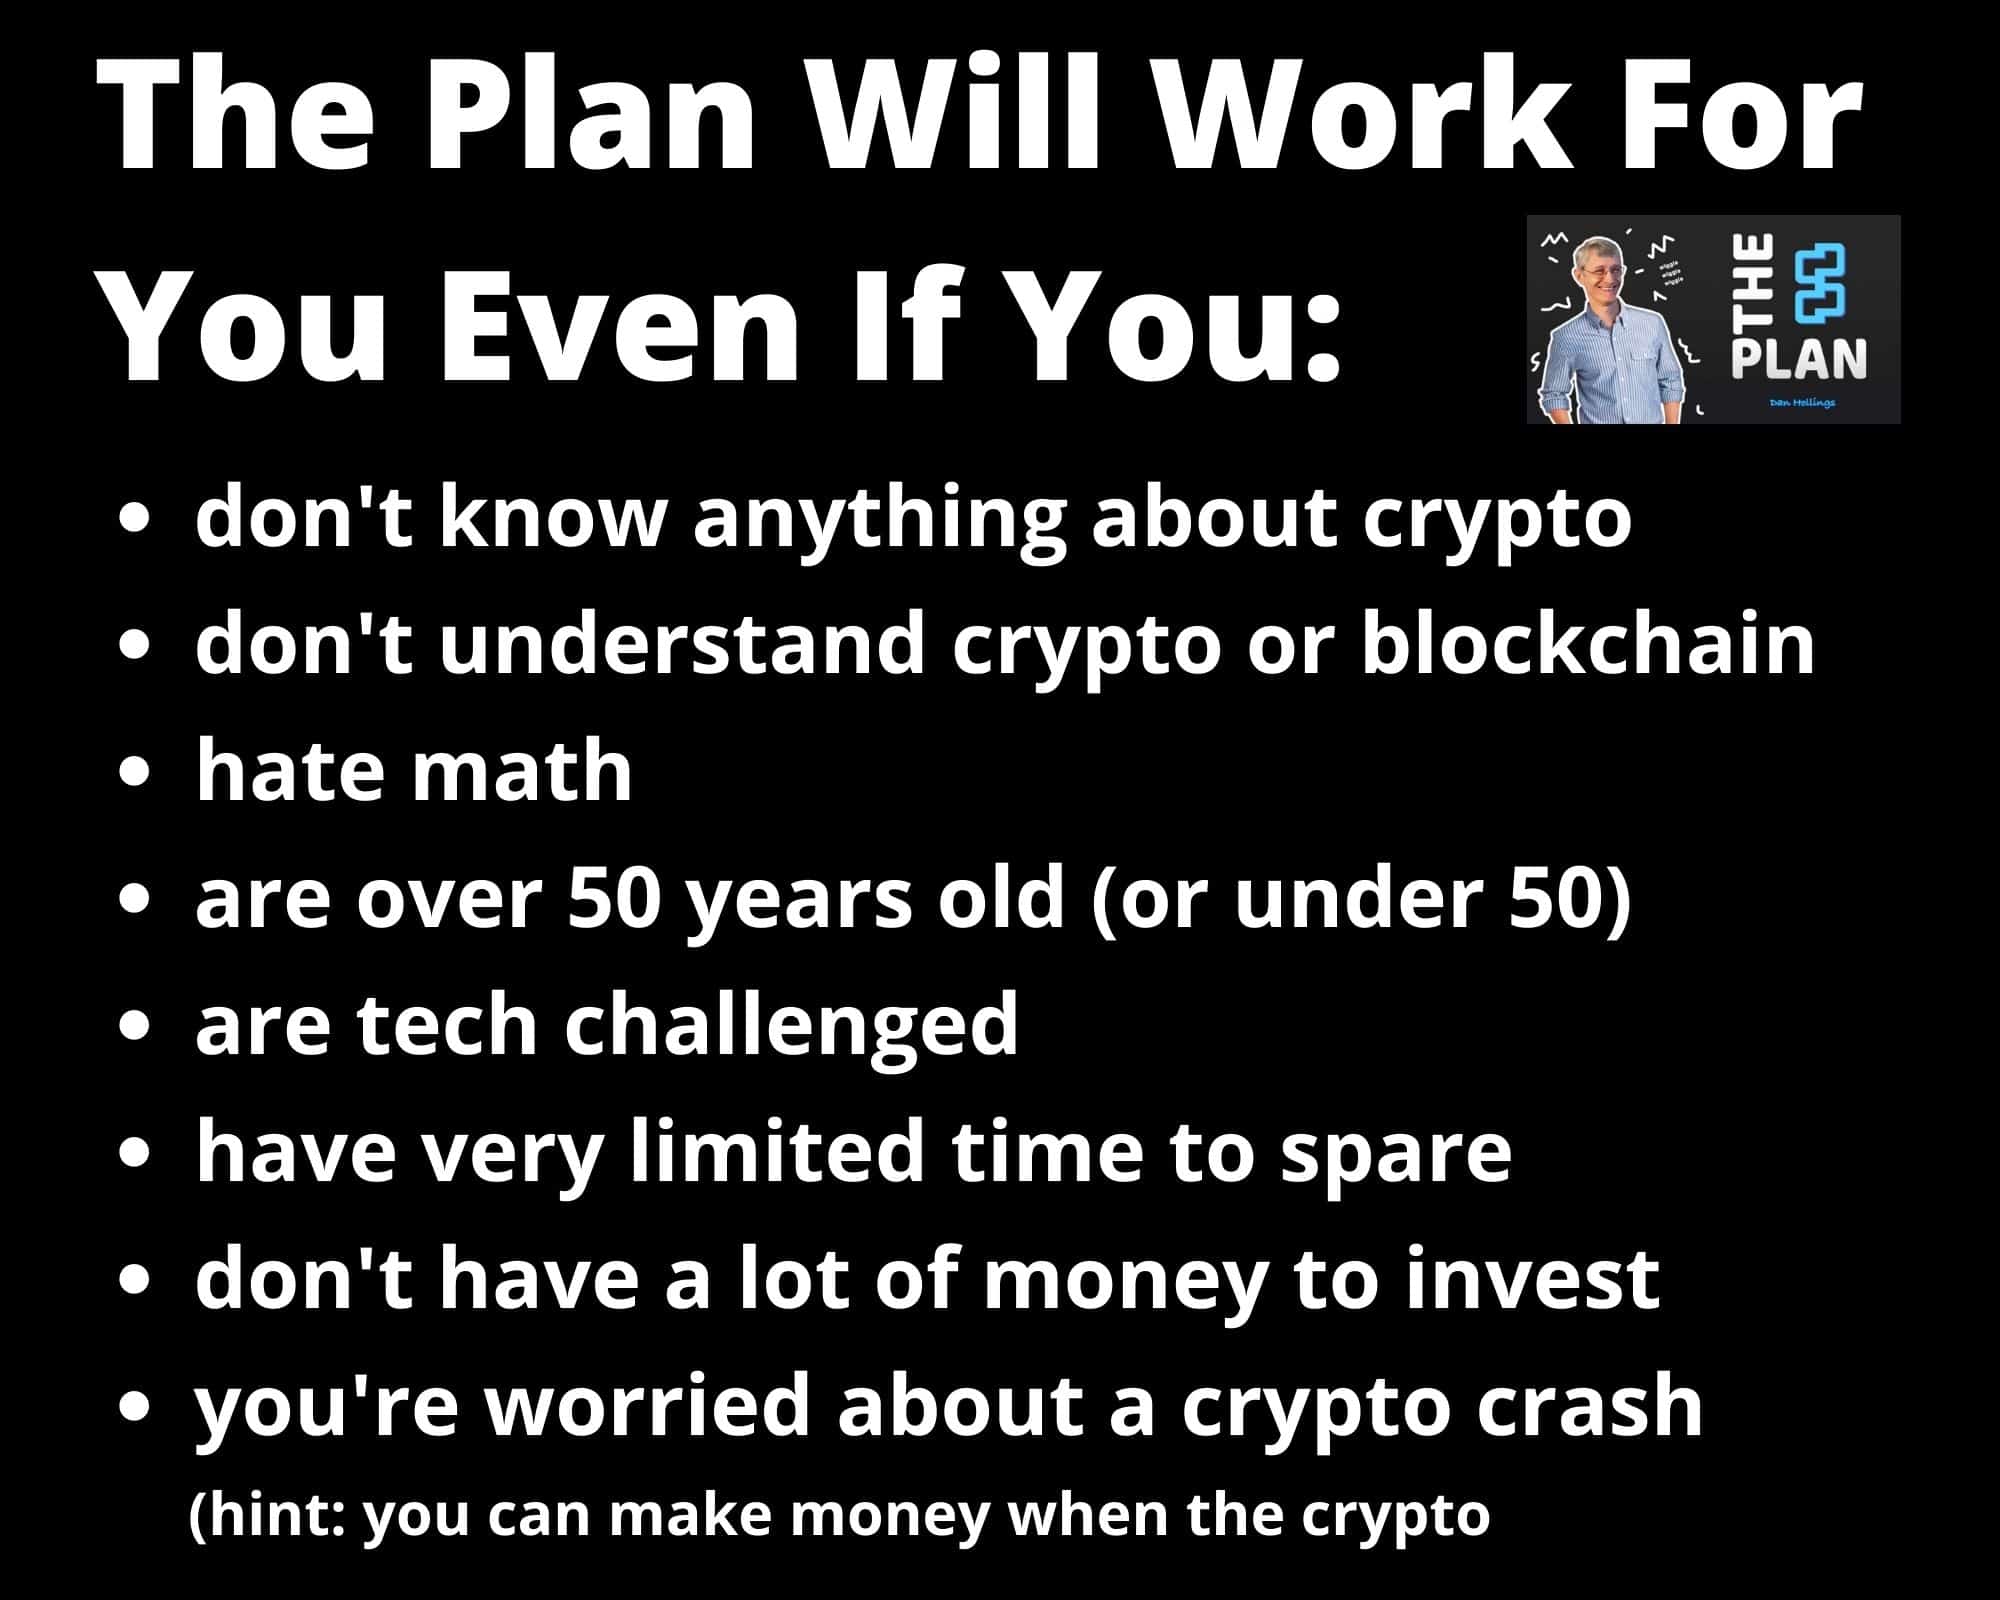 Dan Hollings The Plan will work for you and your crypto to invest even if.....